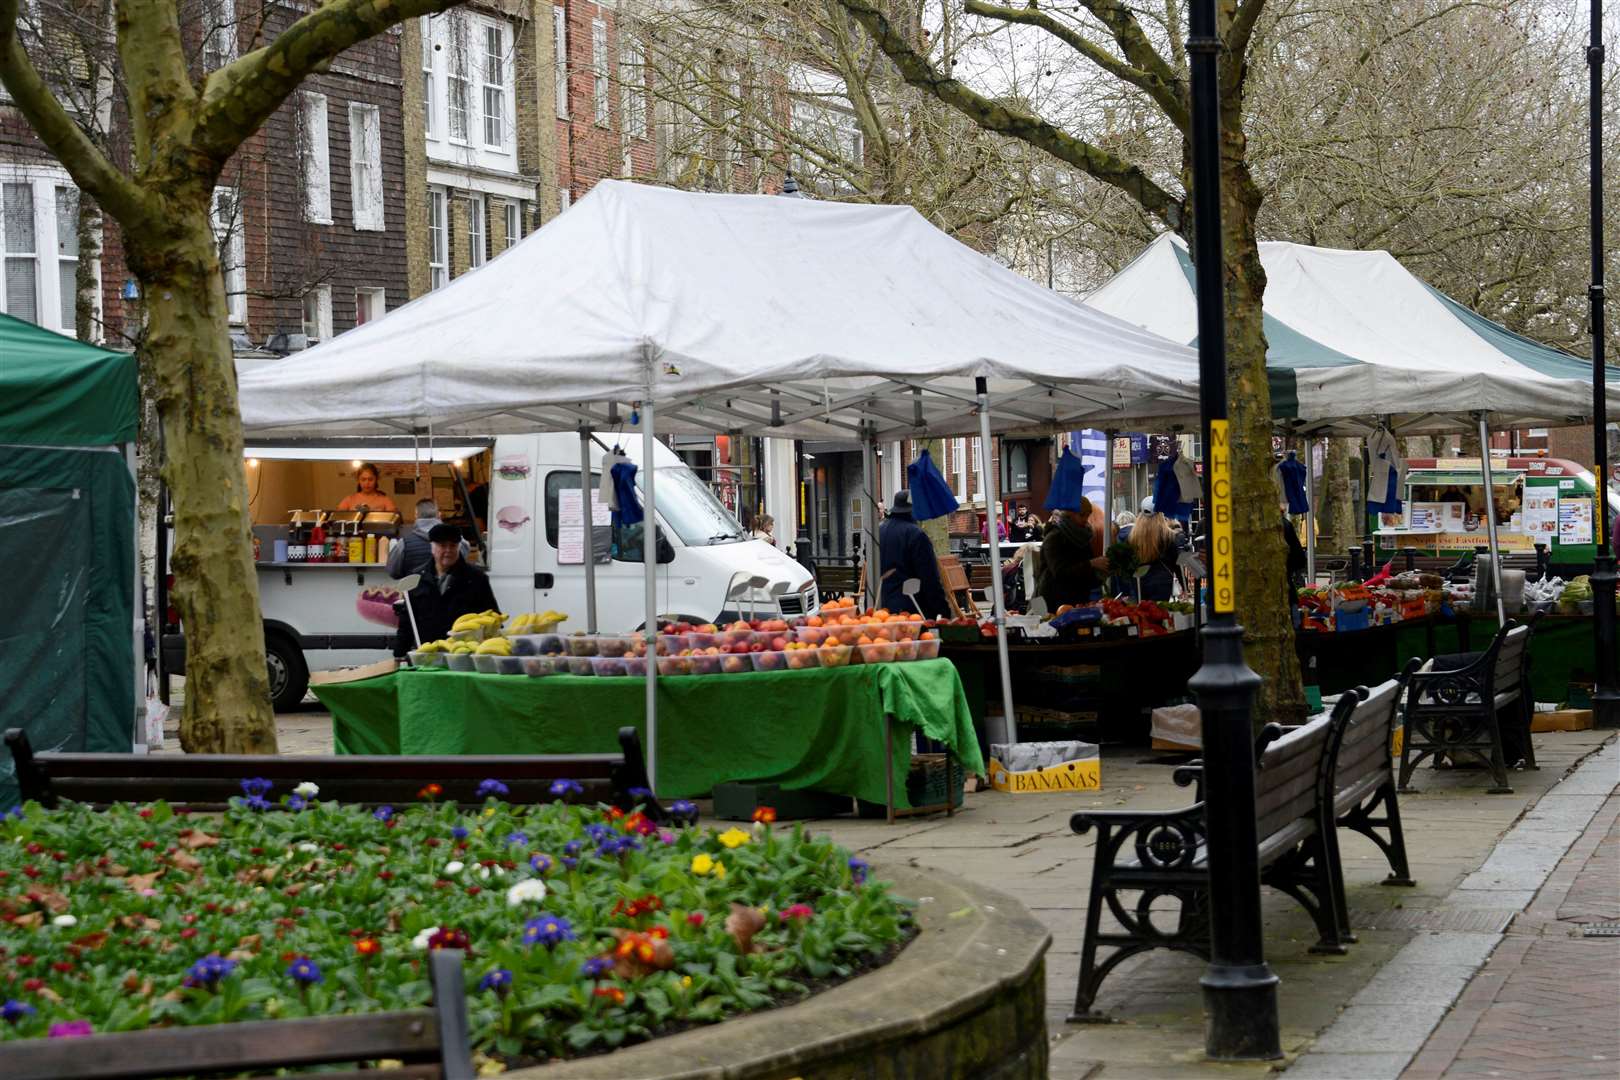 If approved, the plans would see stall holders pitch their stalls on Saturdays. Picture: Paul Amos